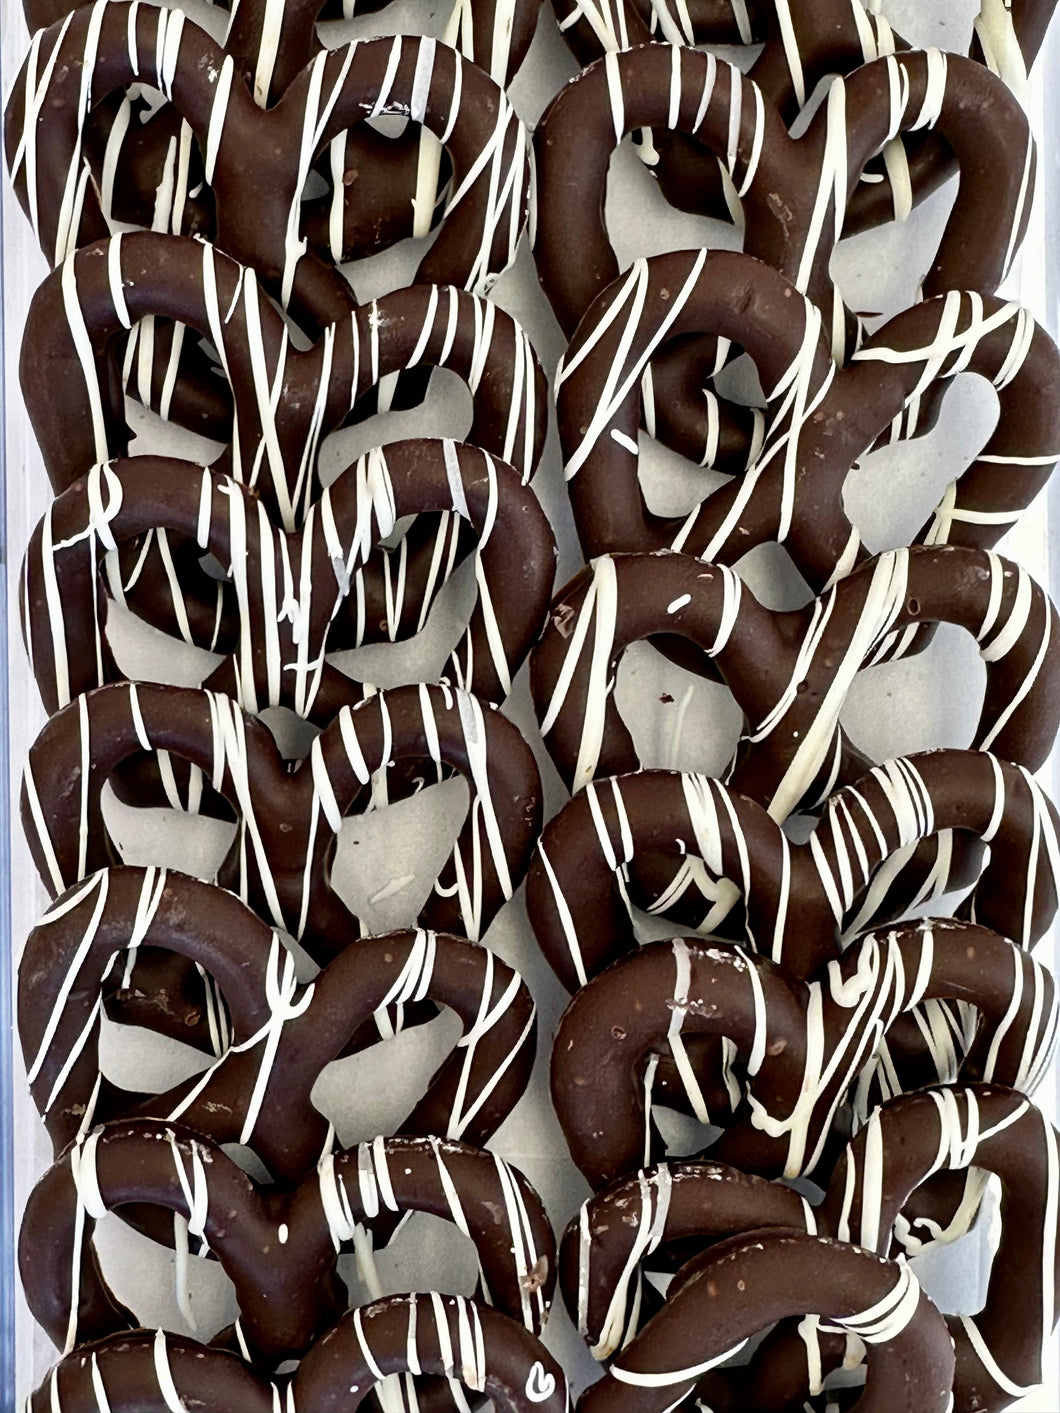 Dark Chocolate Covered Pretzels with White Chocolate Drizzle